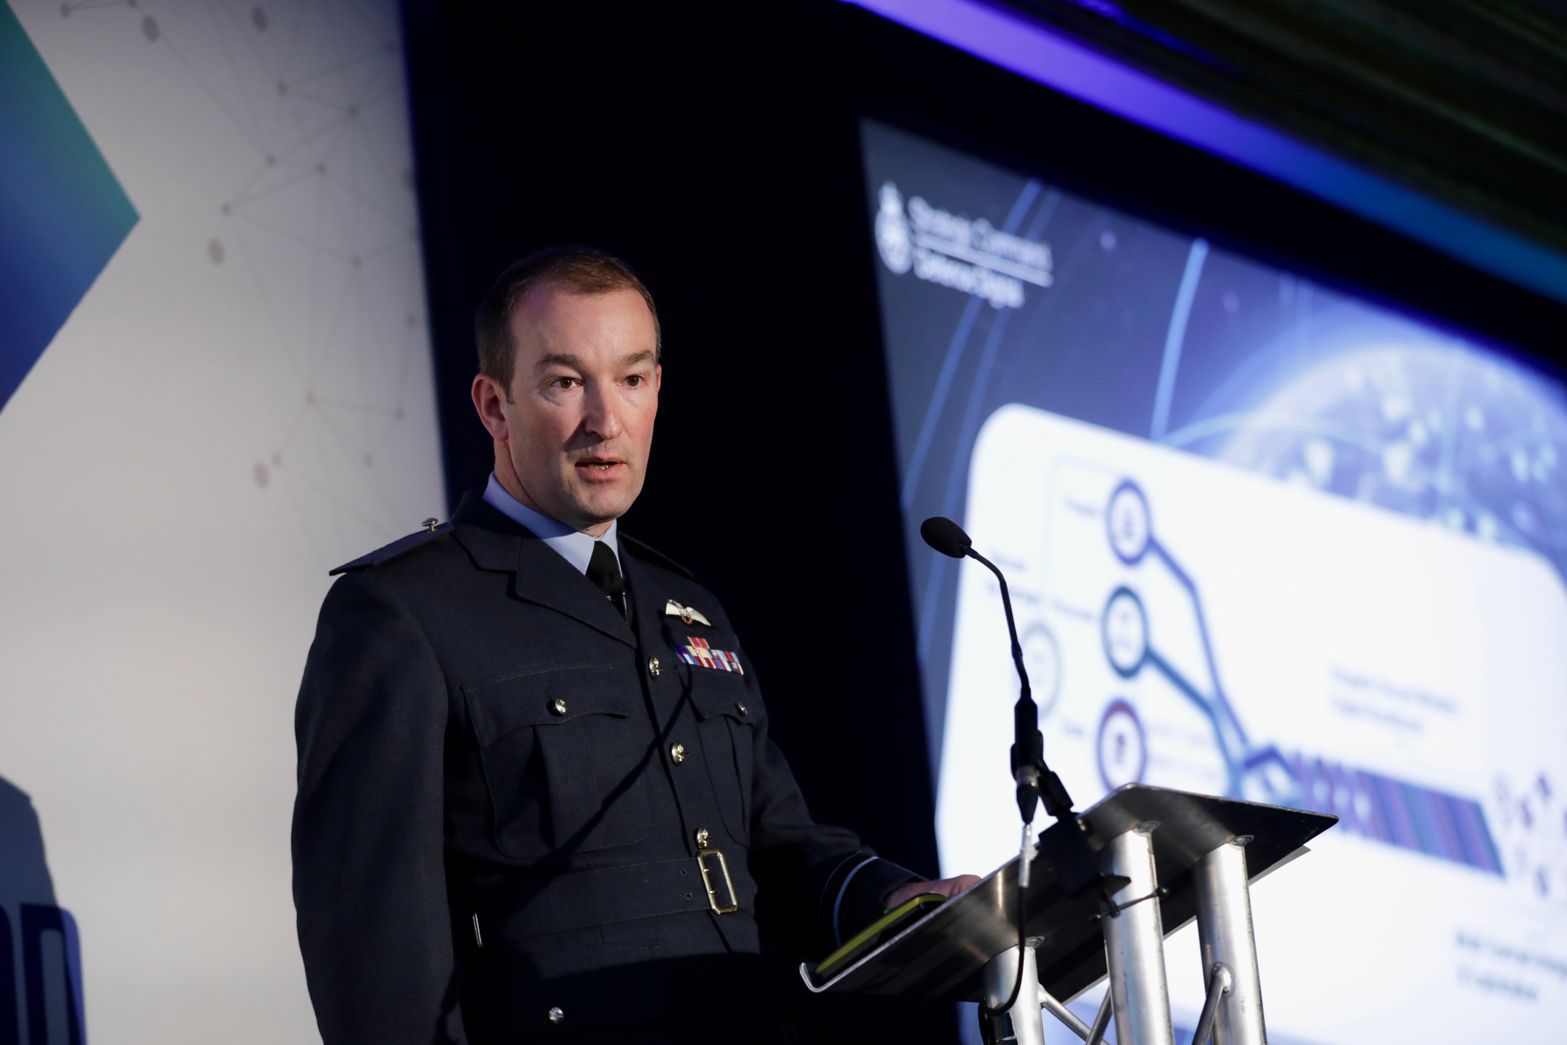 Air Vice-Marshall David Arthurton on putting technology at the forefront of strategy